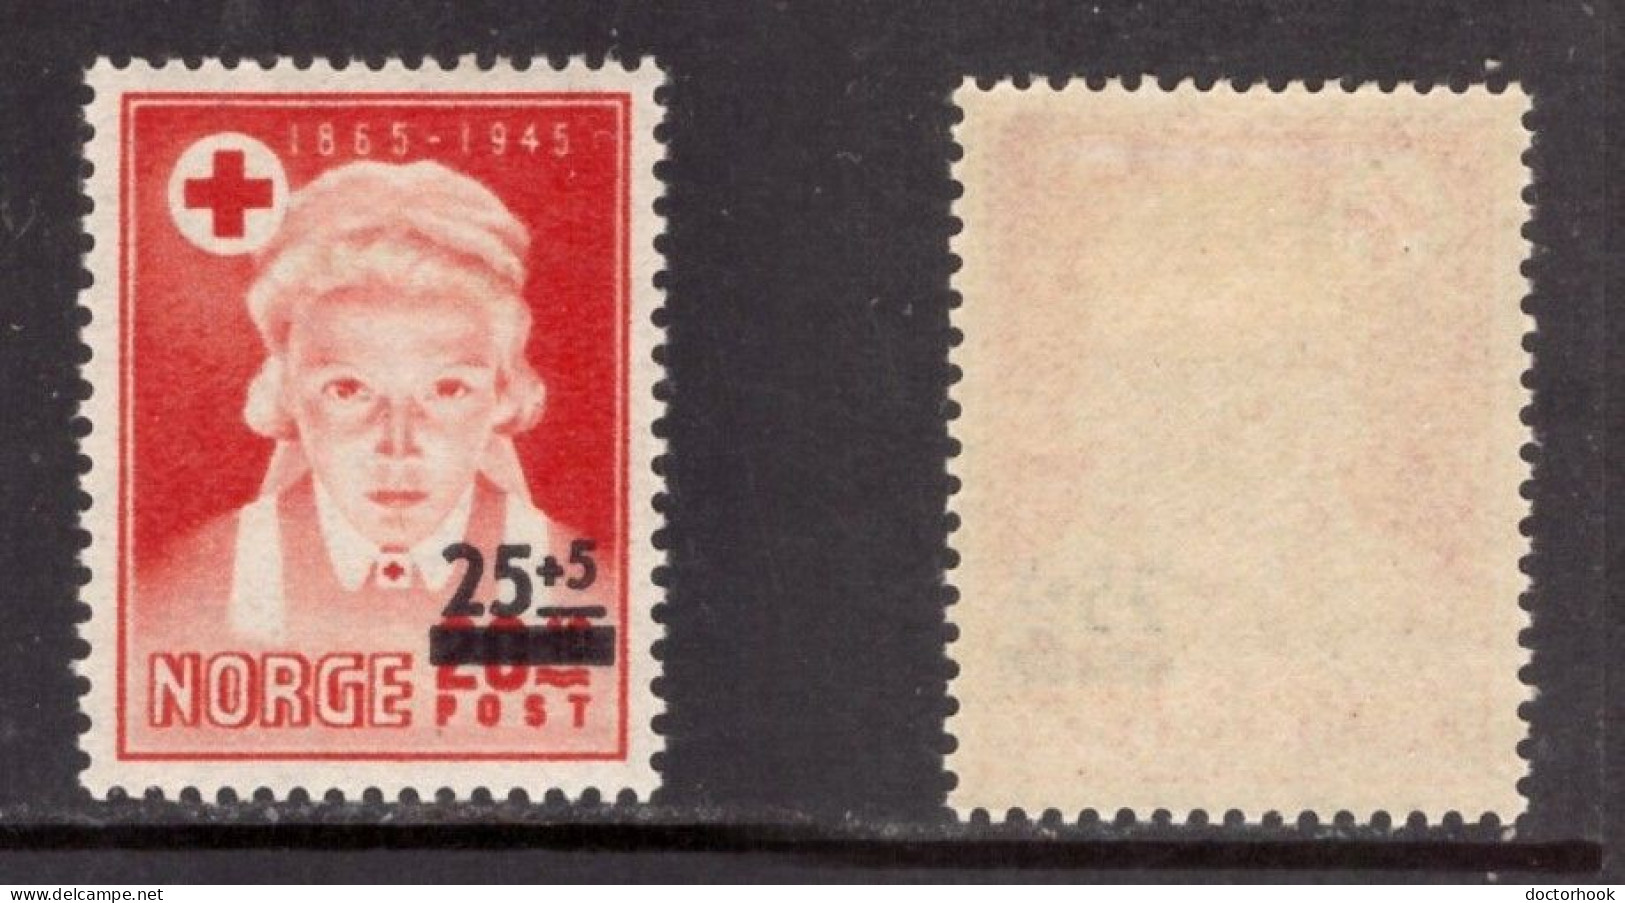 NORWAY   Scott # B 47* MINT LH (CONDITION AS PER SCAN) (Stamp Scan # 978-16) - Nuovi